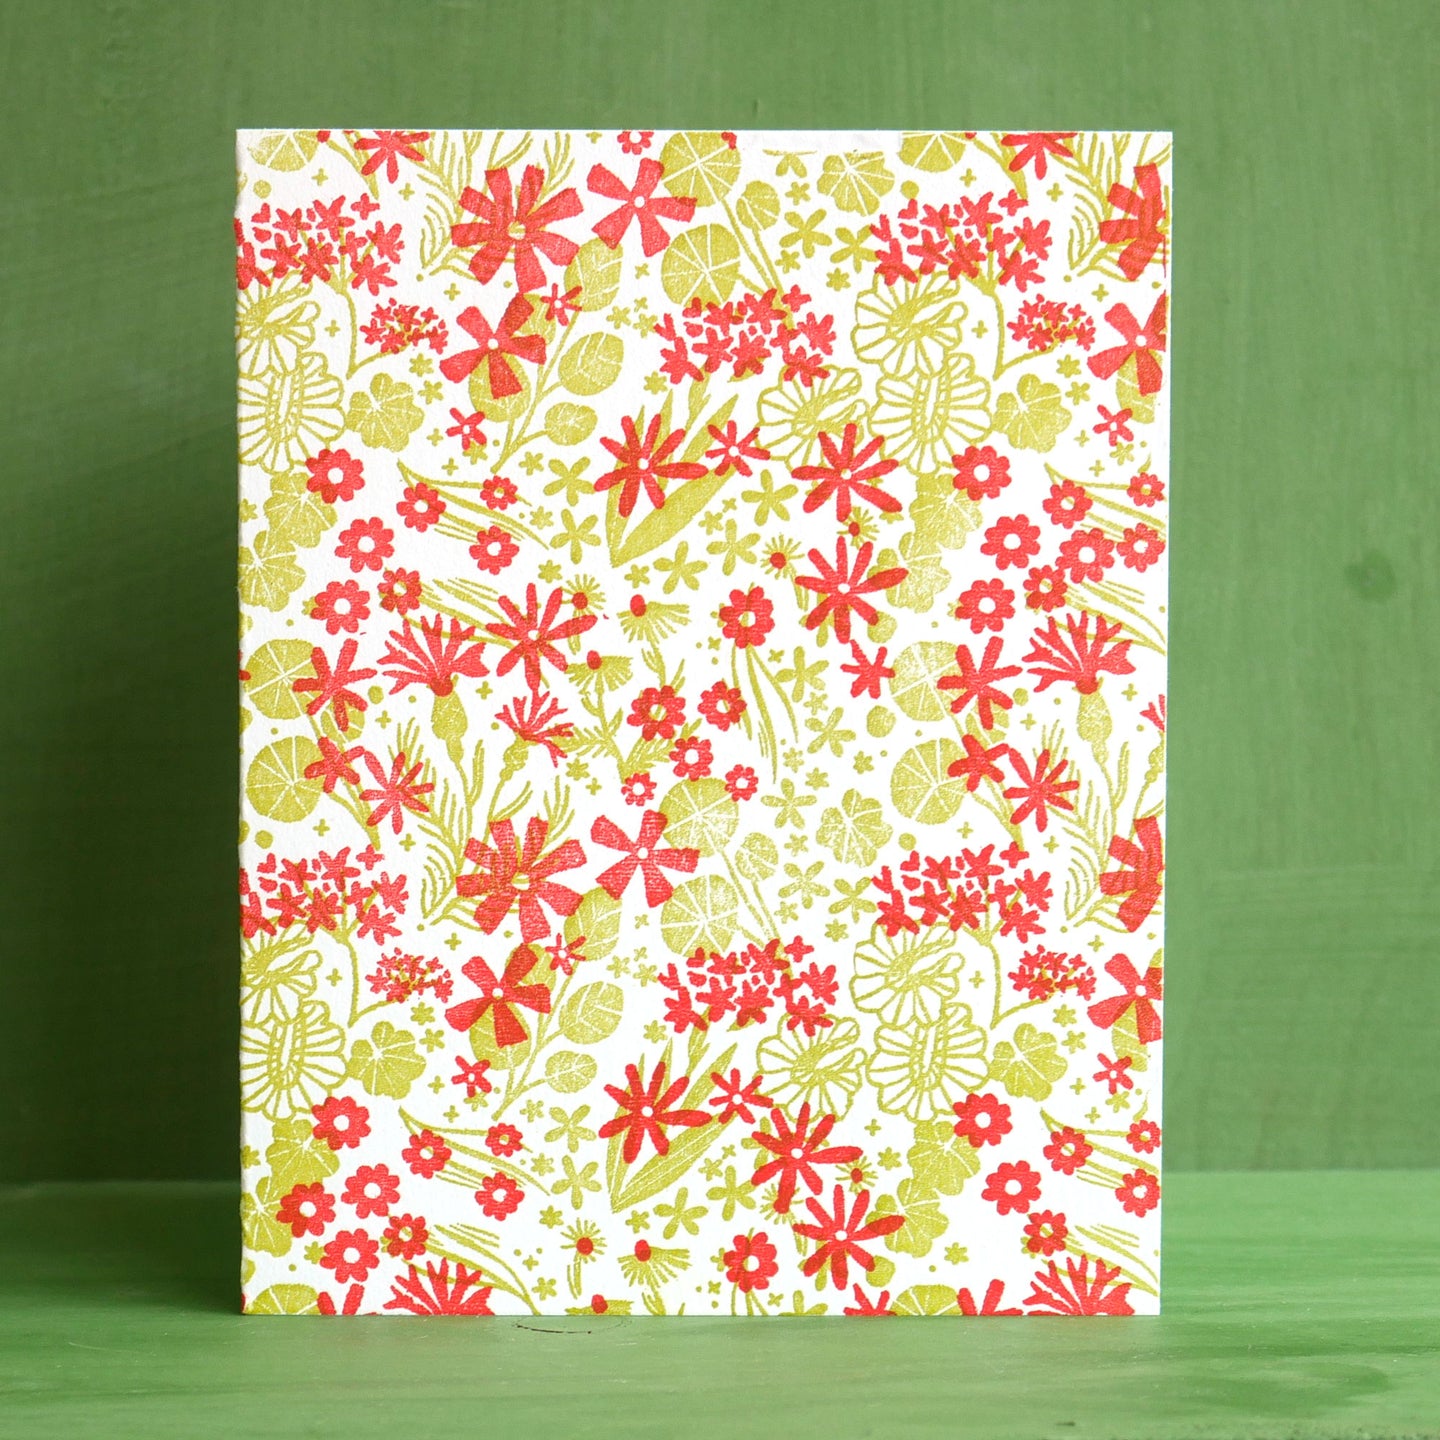 Late Bloomer, Letterpress Greeting Card